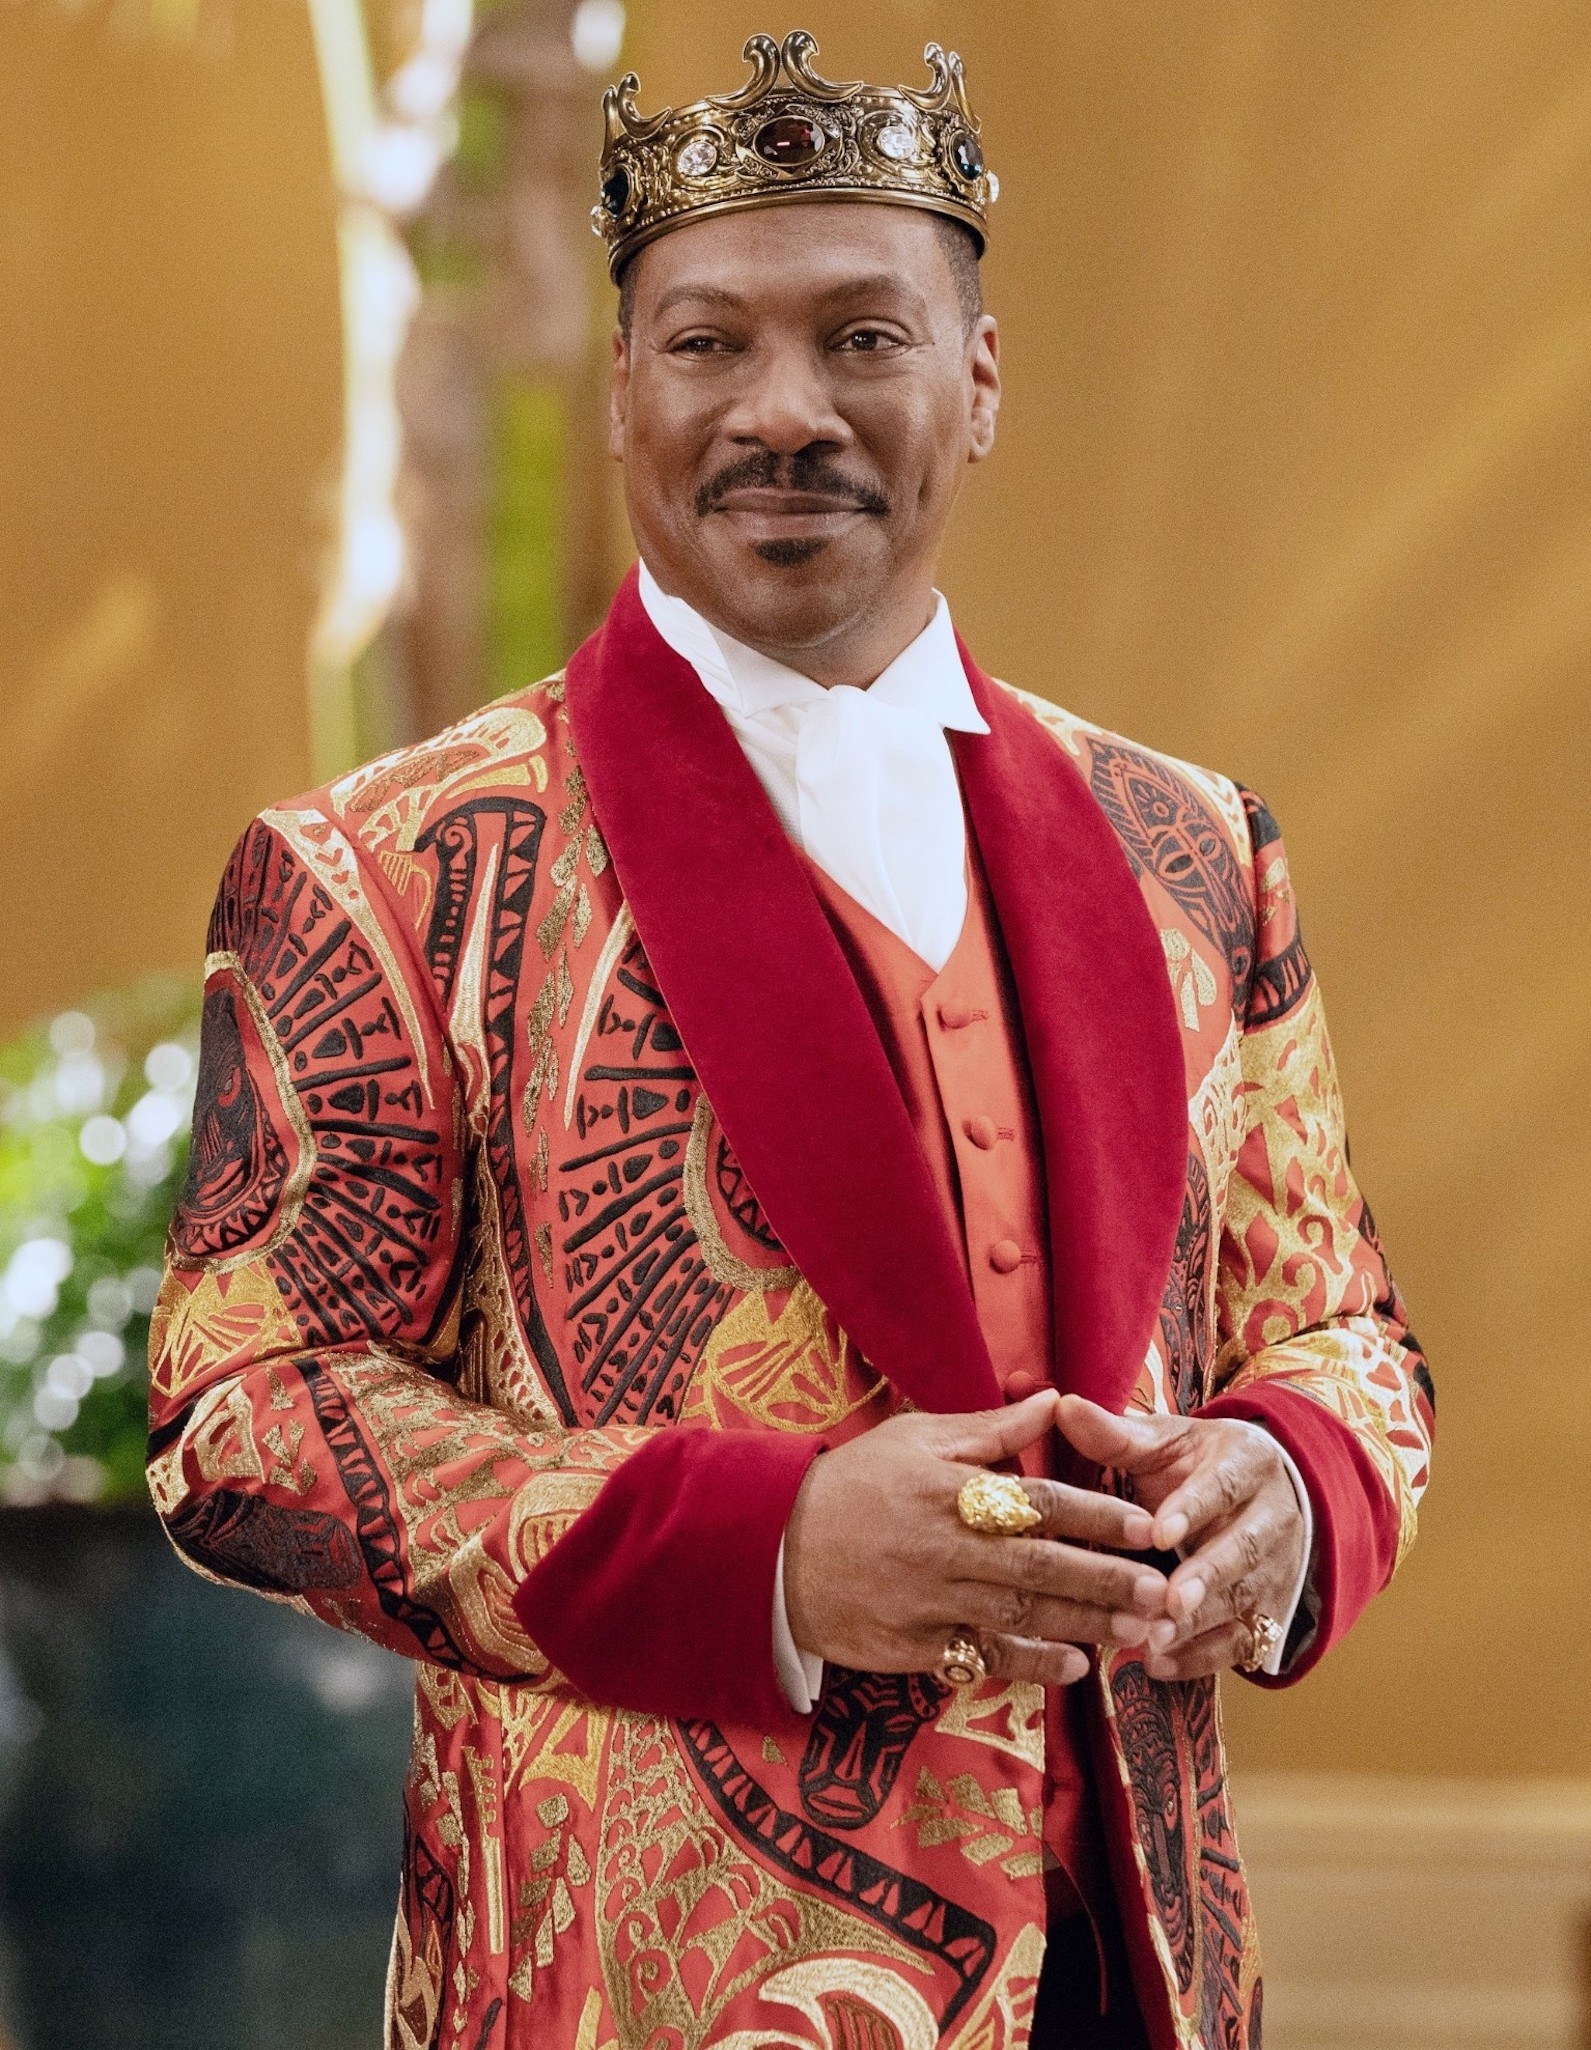 Eddie Murphy wearing a colorful blazer, a crown, and rings